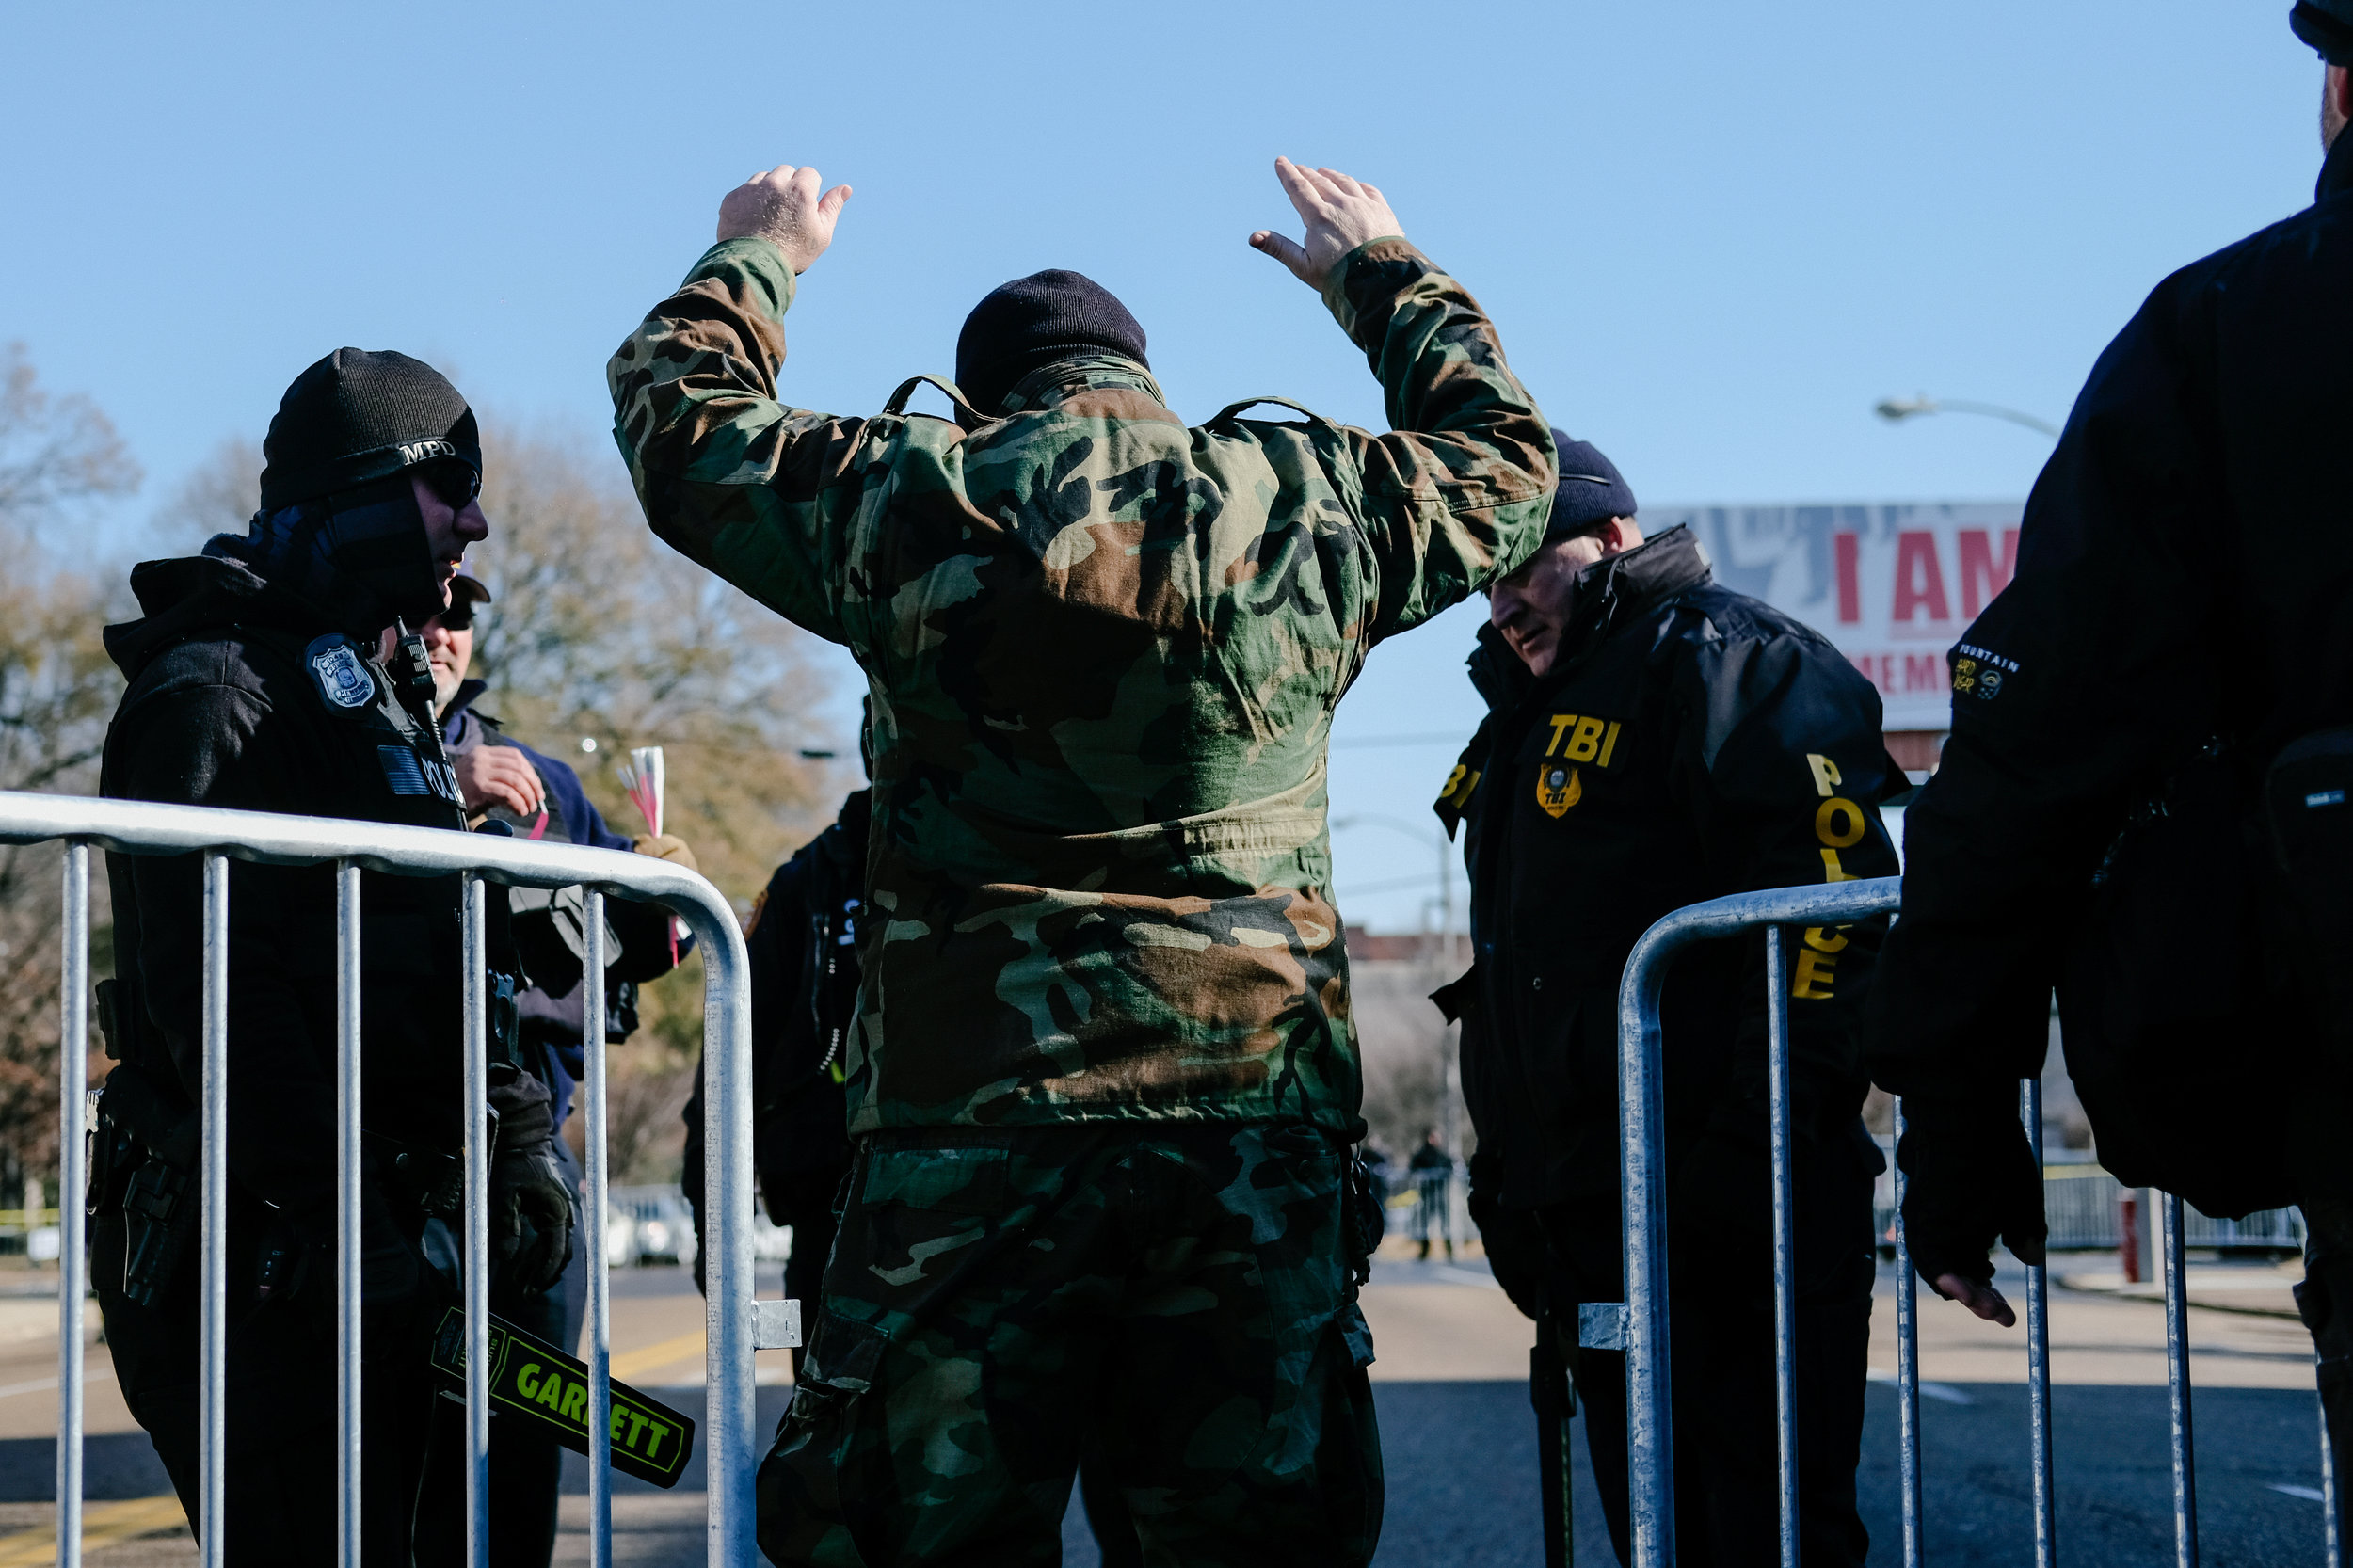  A White Nationalist protester passes through a police barricade to enter a protest by the Shield Wall Network over the removal of confederate statues in Memphis, January 6, 2018.  